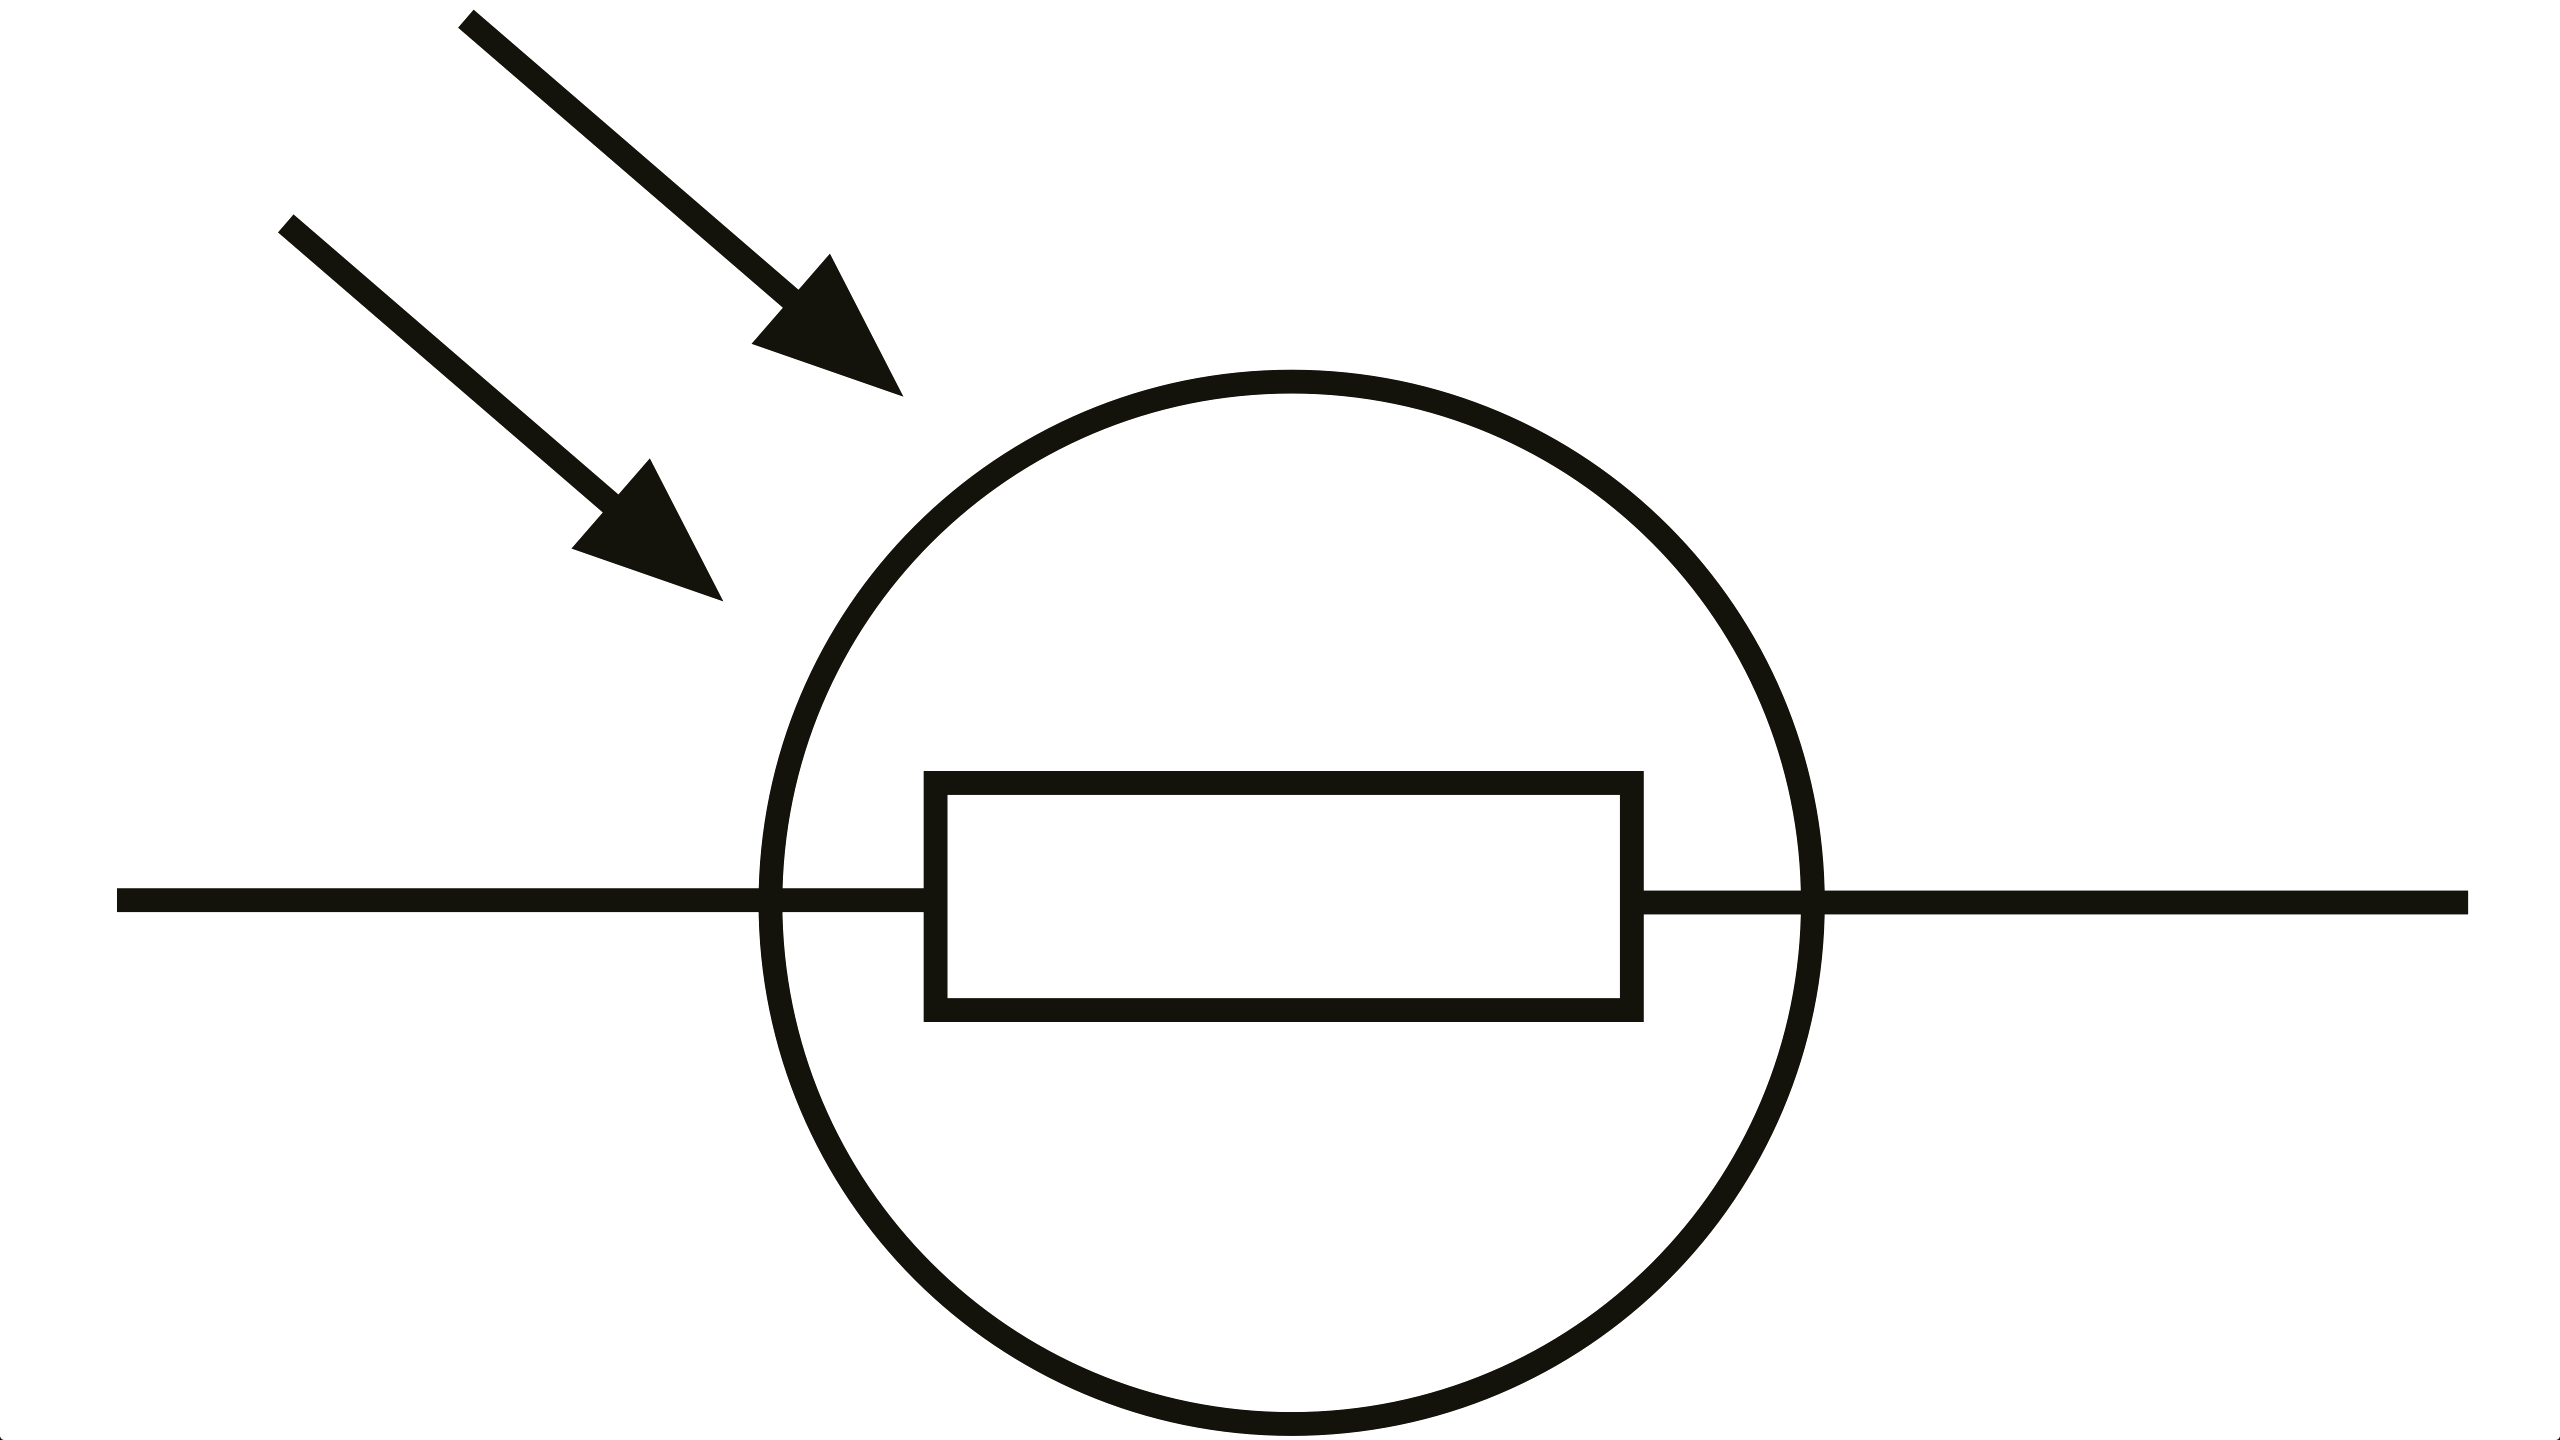 Component. symbol of a resistor: Resistor Wikipedia The Free ...